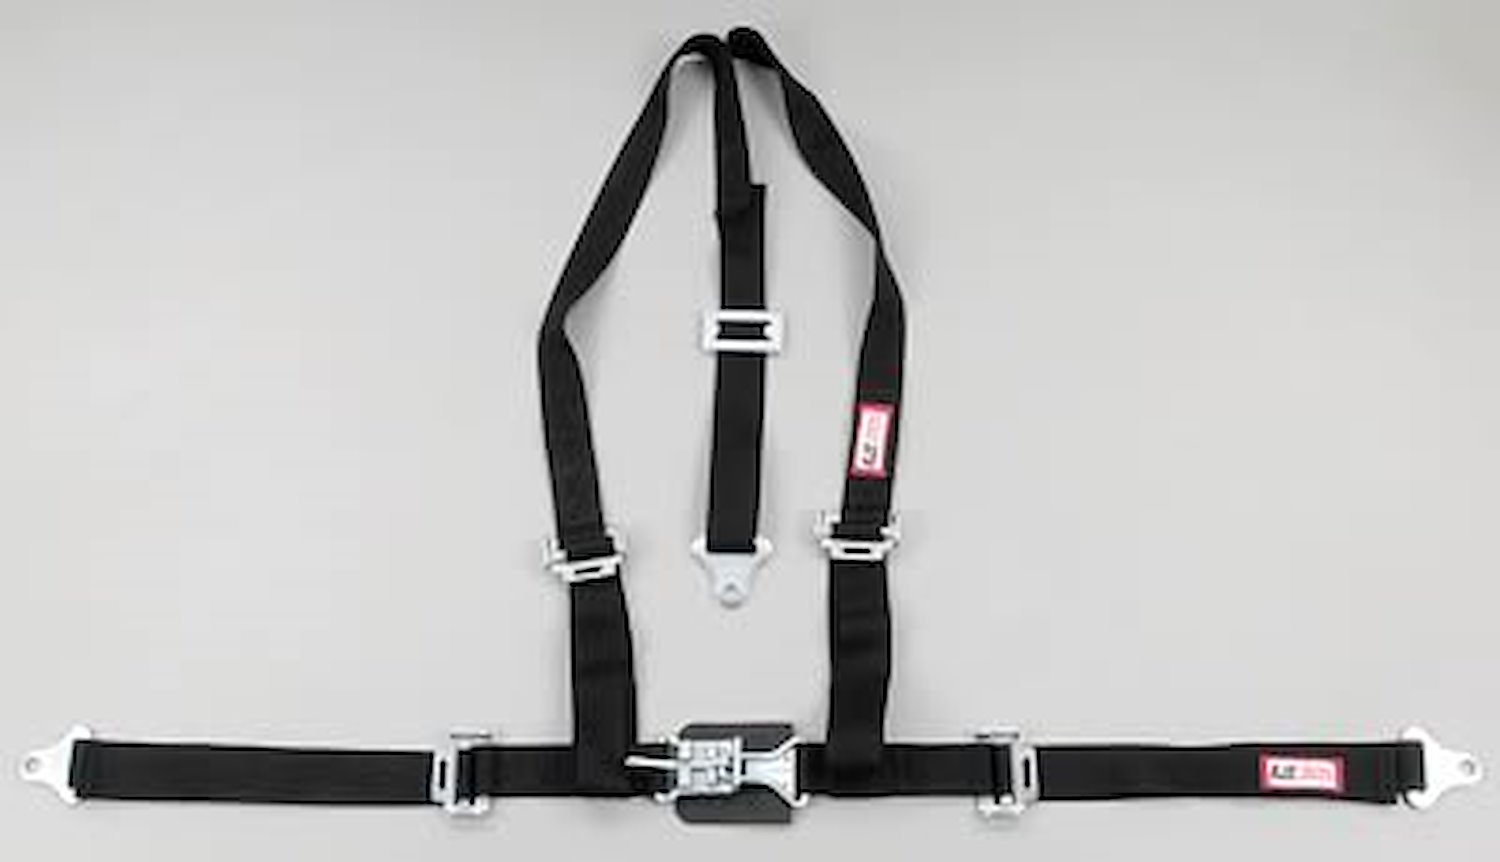 NON-SFI L&L HARNESS 3 PULL UP Lap Belt SNAP SEWN IN 2 S.H. Individual FLOOR Mount WRAP/SNAP BLACK